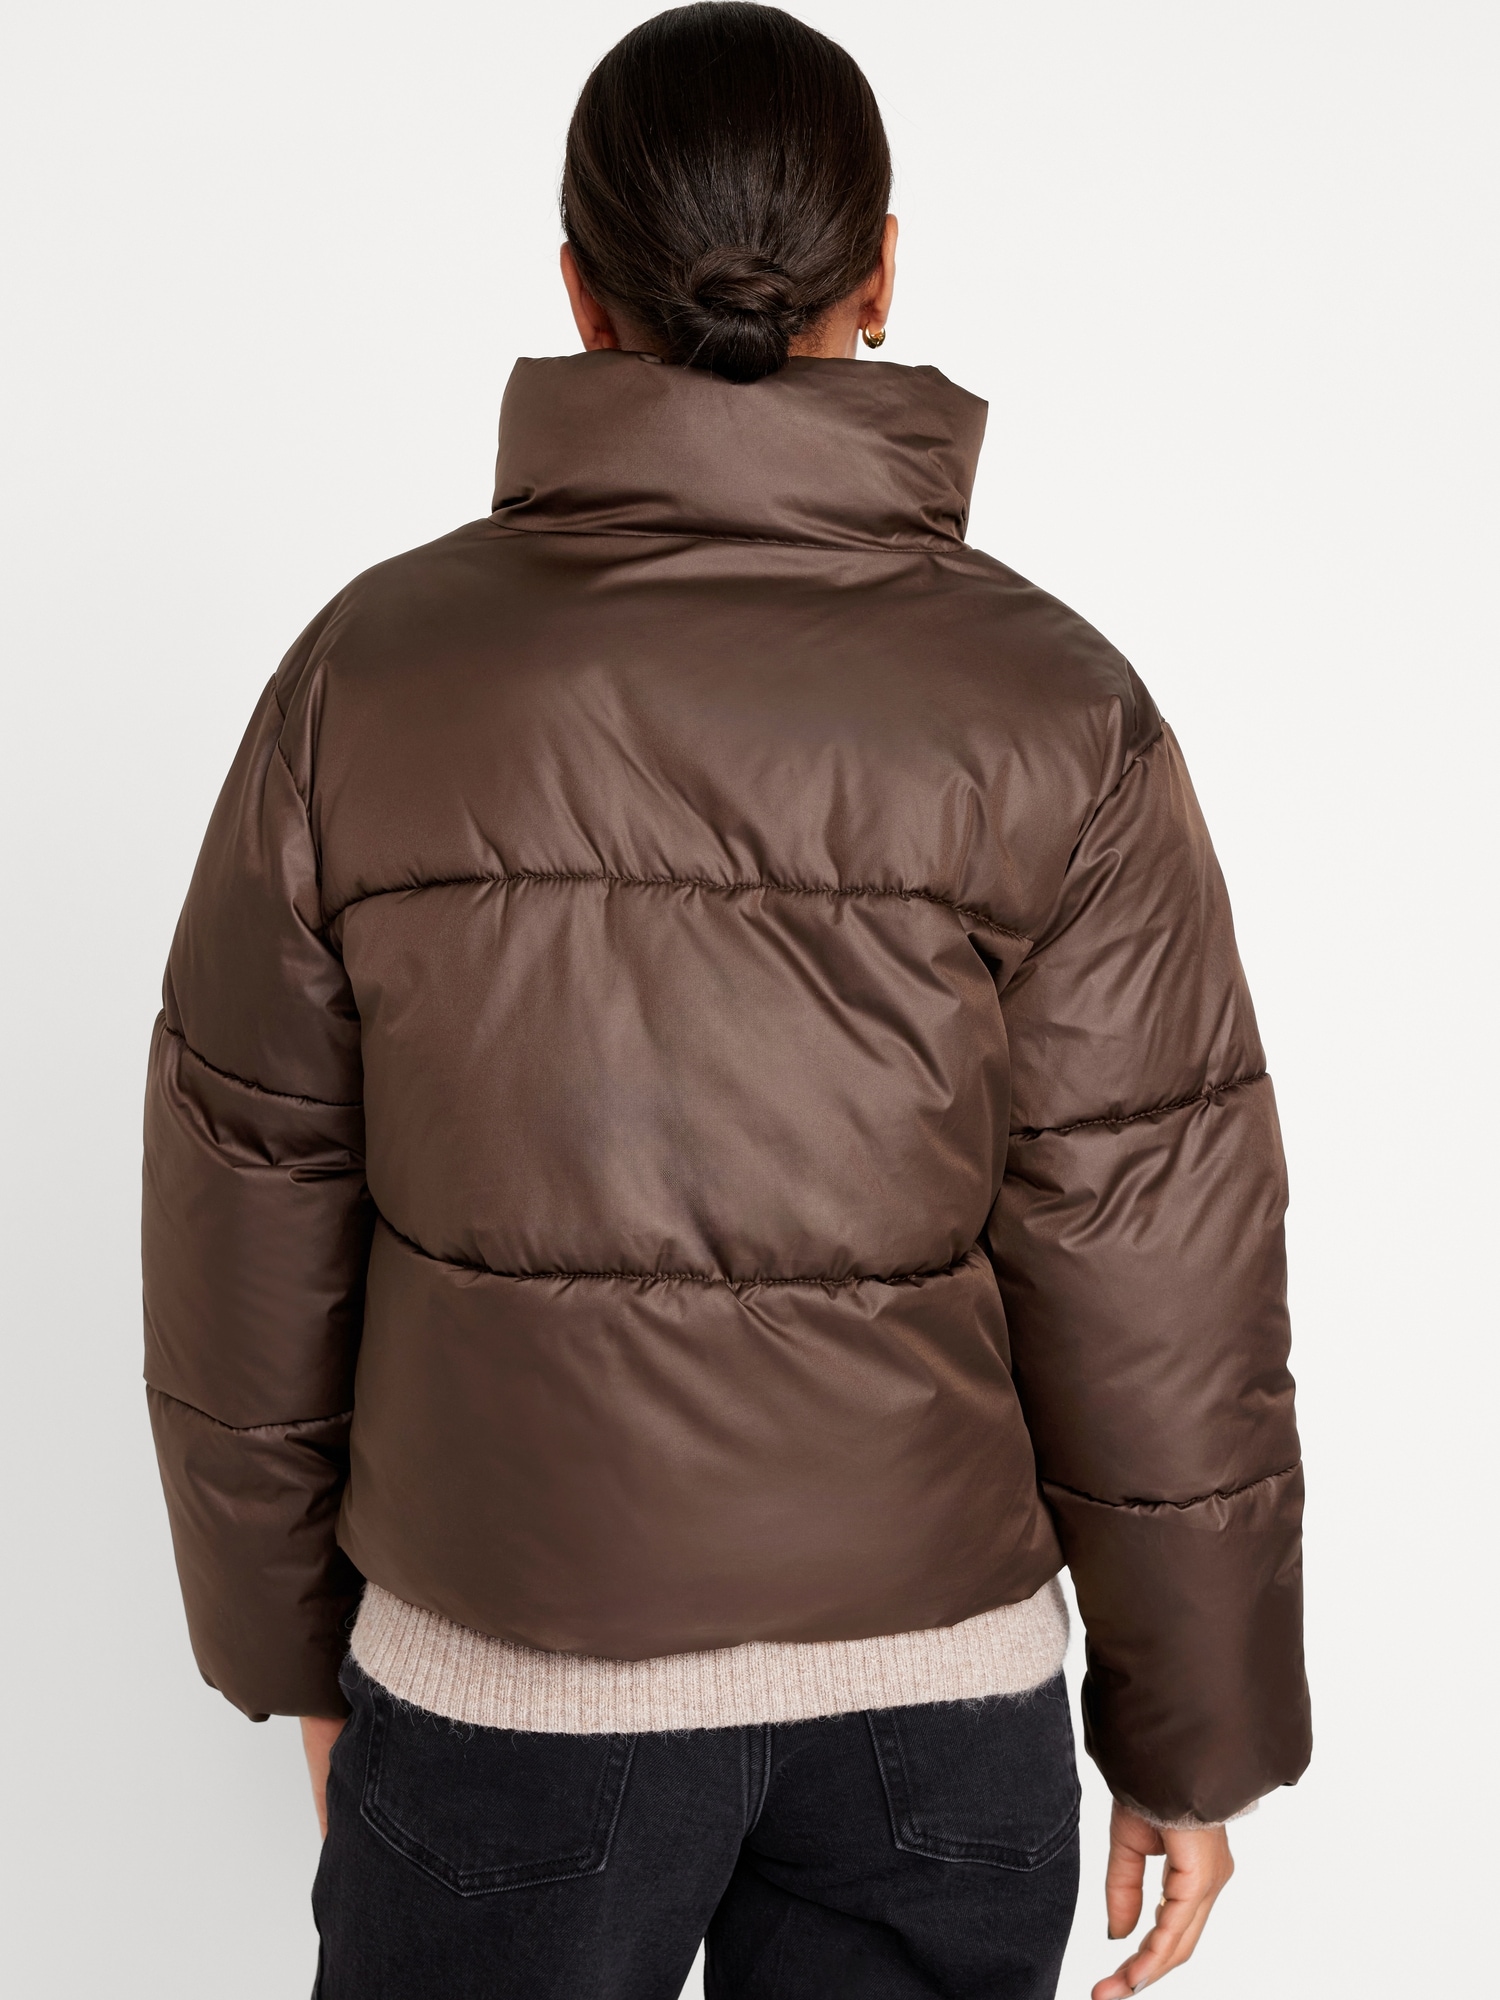 Women's Quilted Jackets / Puffer Jackets: 1000+ Items up to −87%